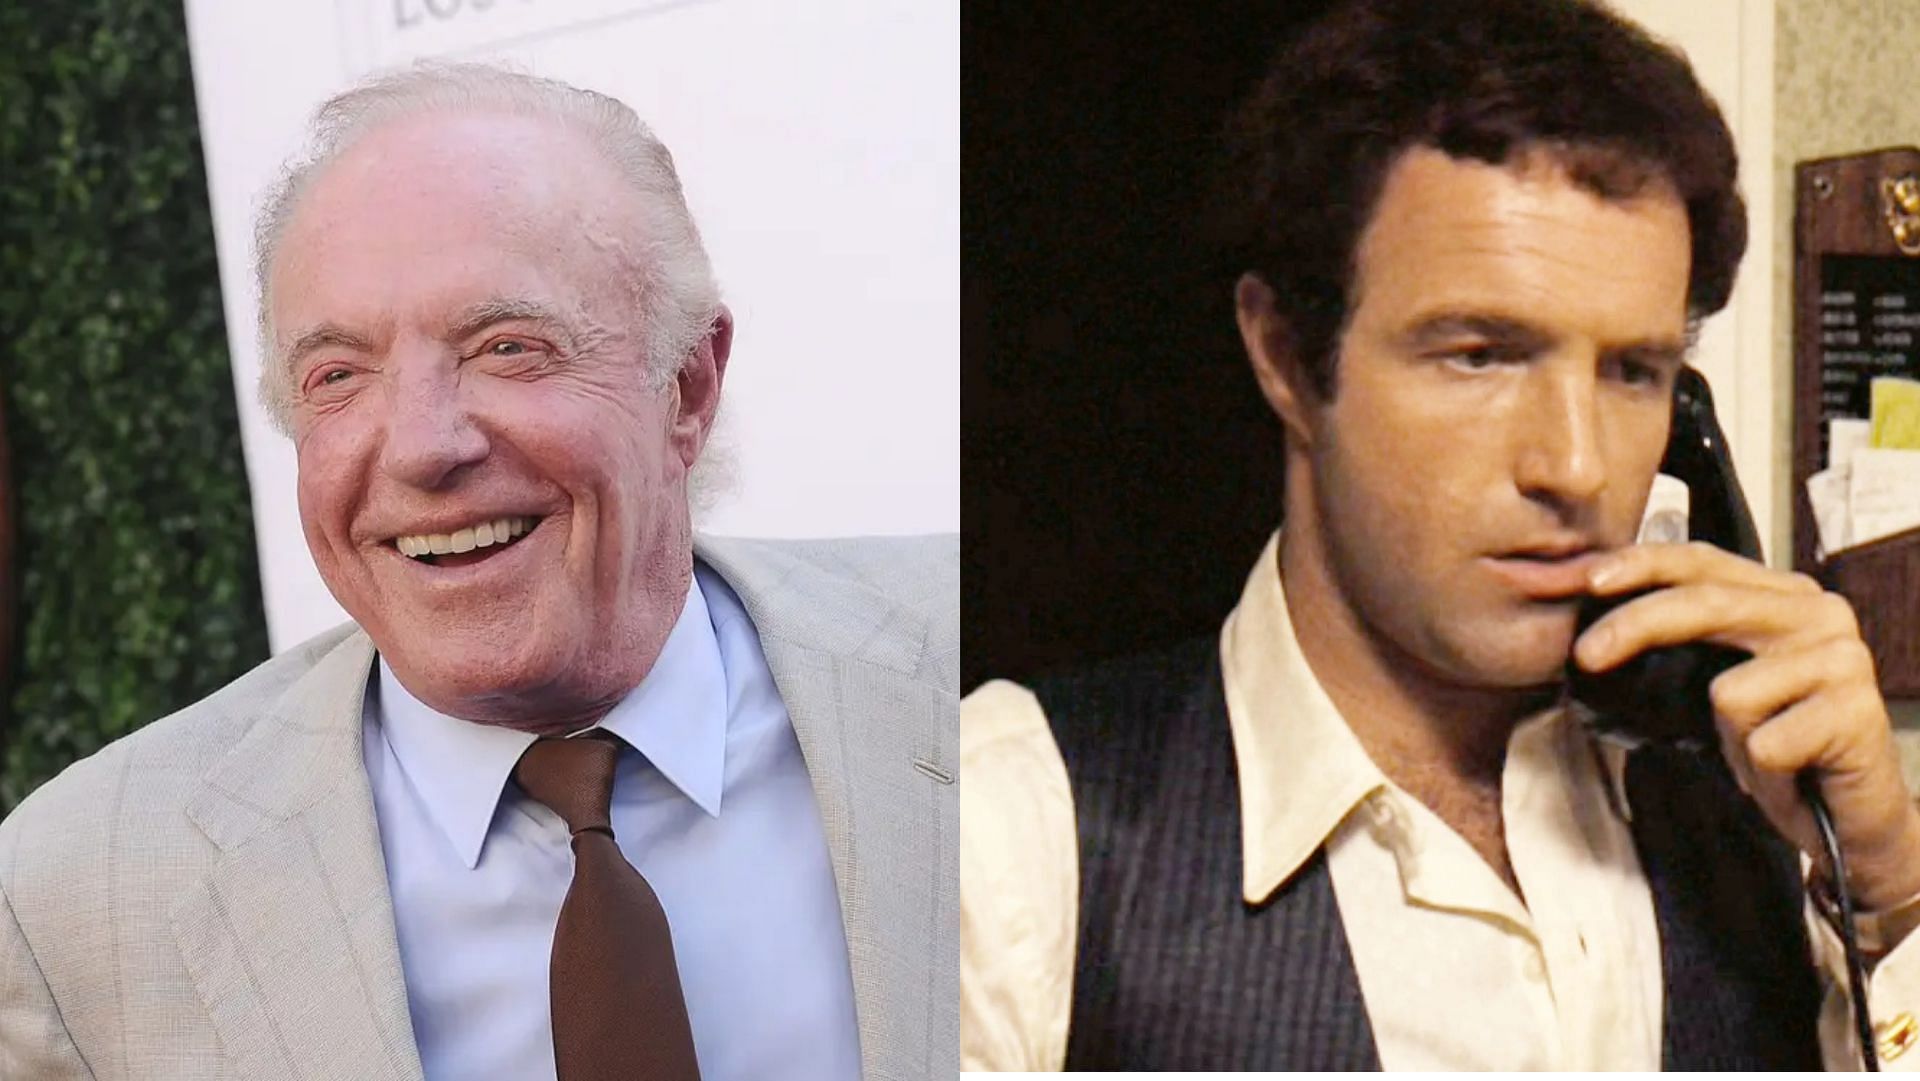 James Caan in 2017 and in The Godfather (Image via Jason LaVeris/Getty Images, and CBS Photo Archive/Getty Images)